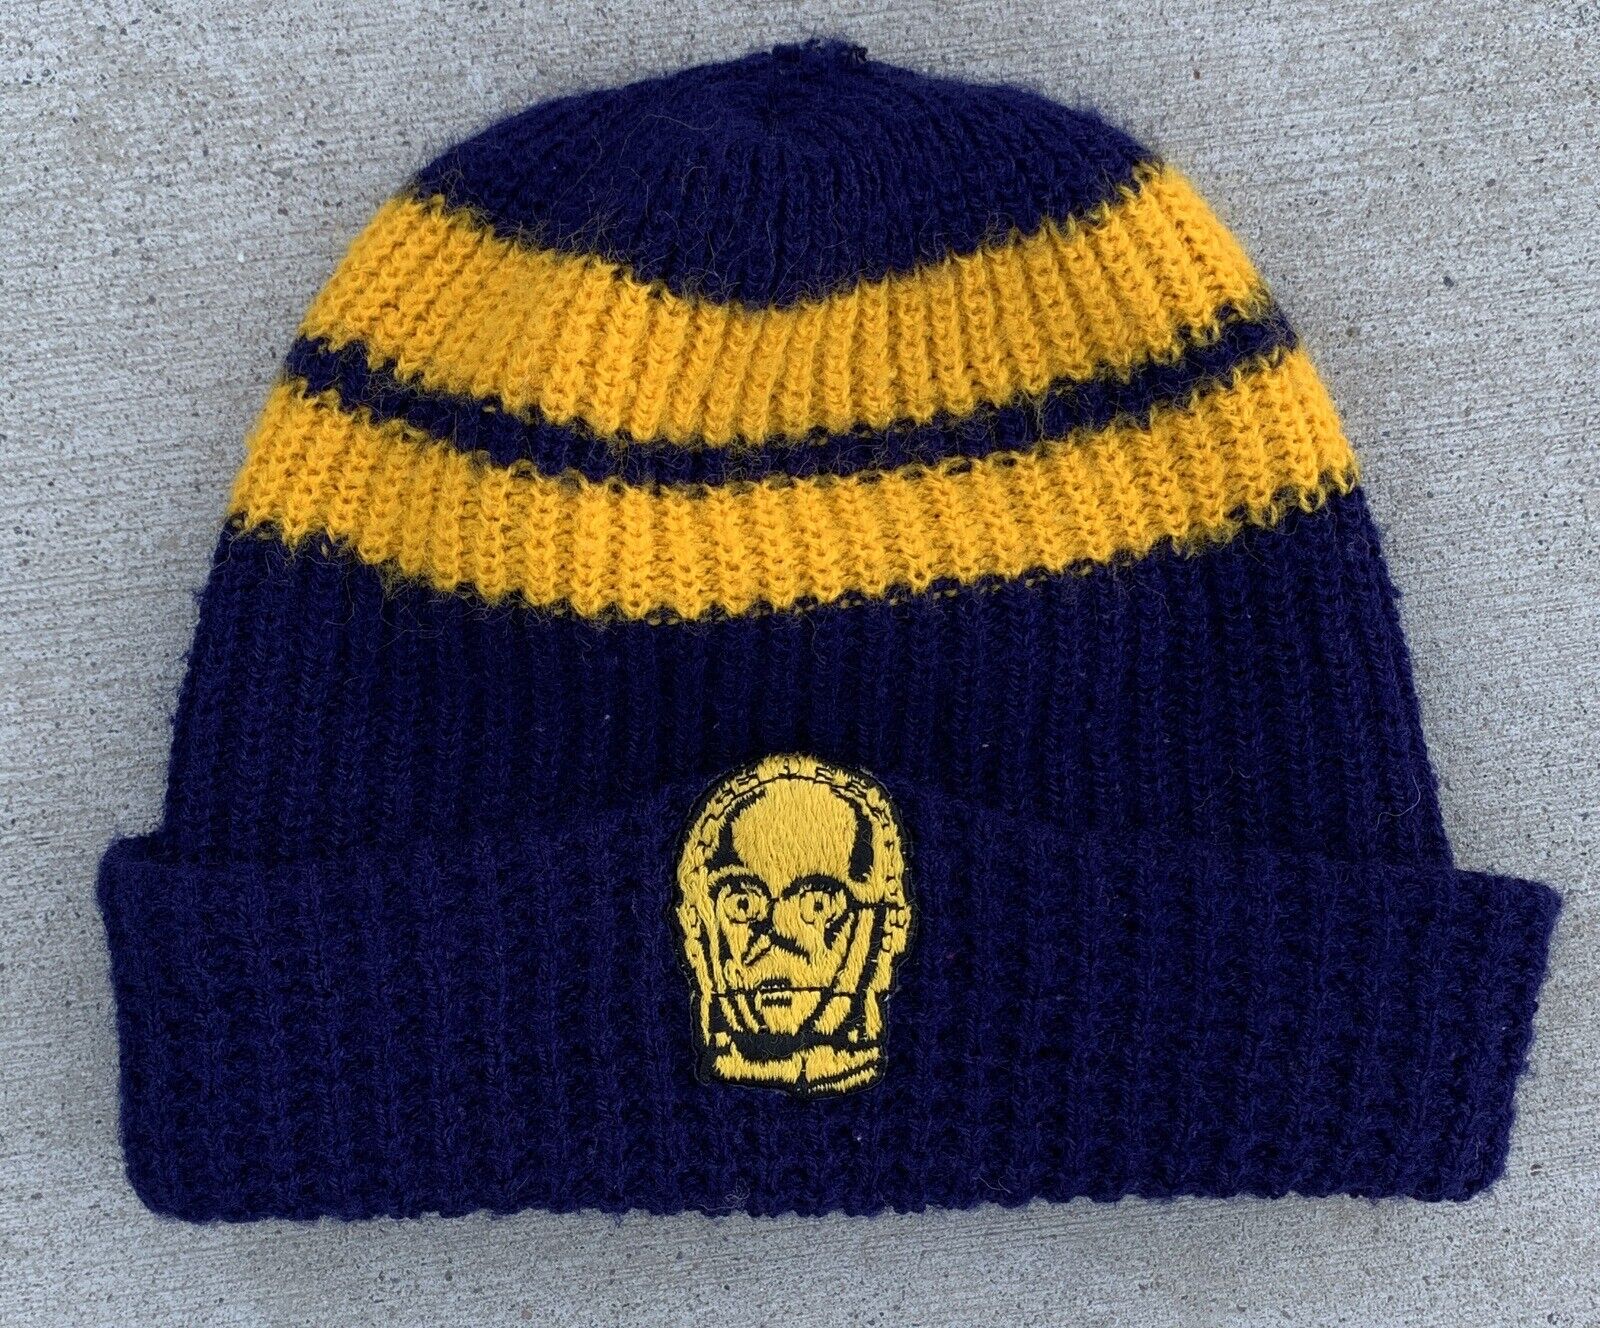 vintage c3po Star Wars Collection acrylic knit beanie hat